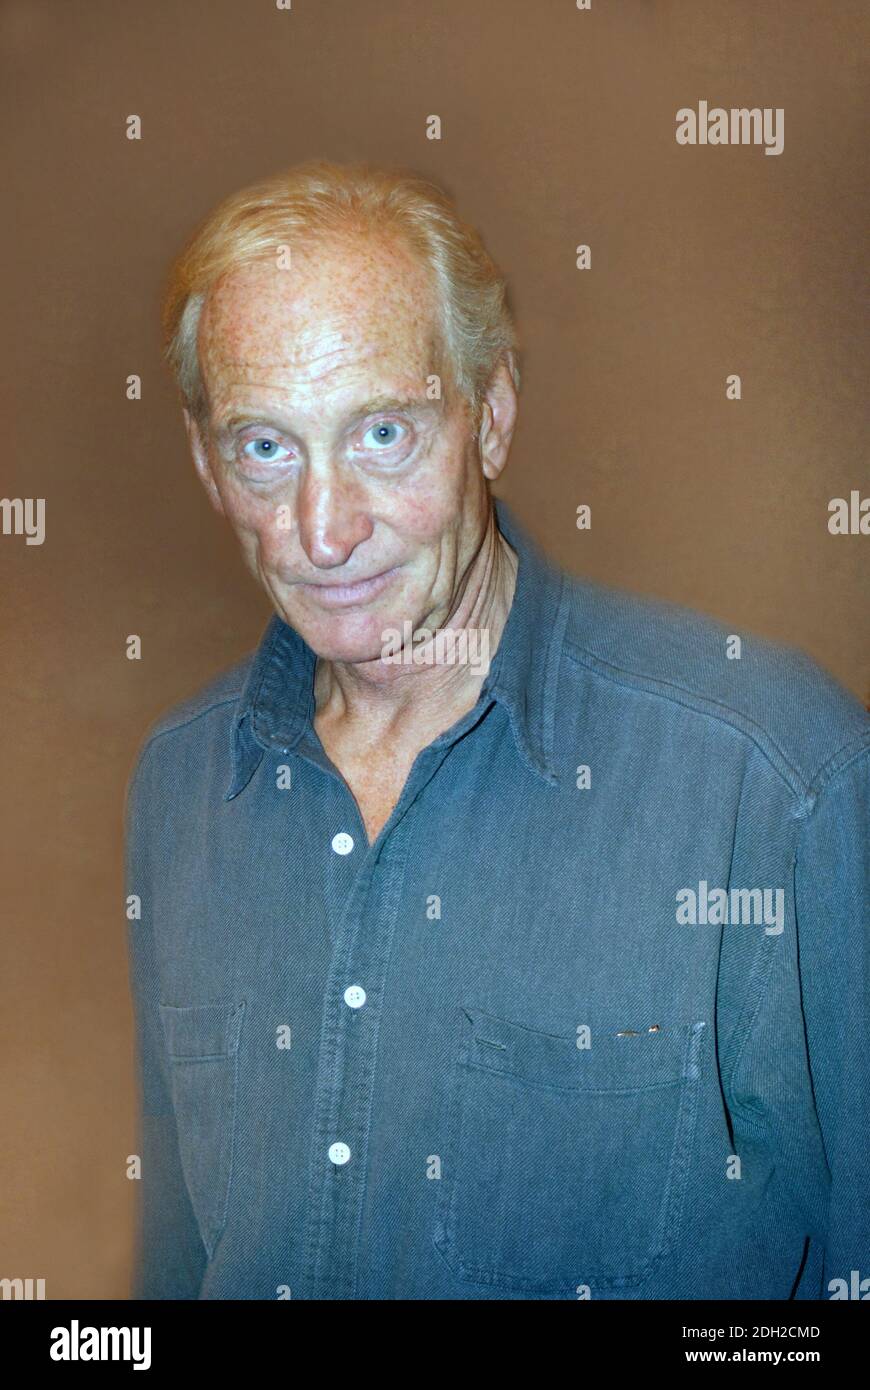 Charles Dance, OBE, English TV, film, stage actor High profile roles include Tywin Lannister in Game of Thrones, The Witcher 3, The Crown, James Bond Stock Photo